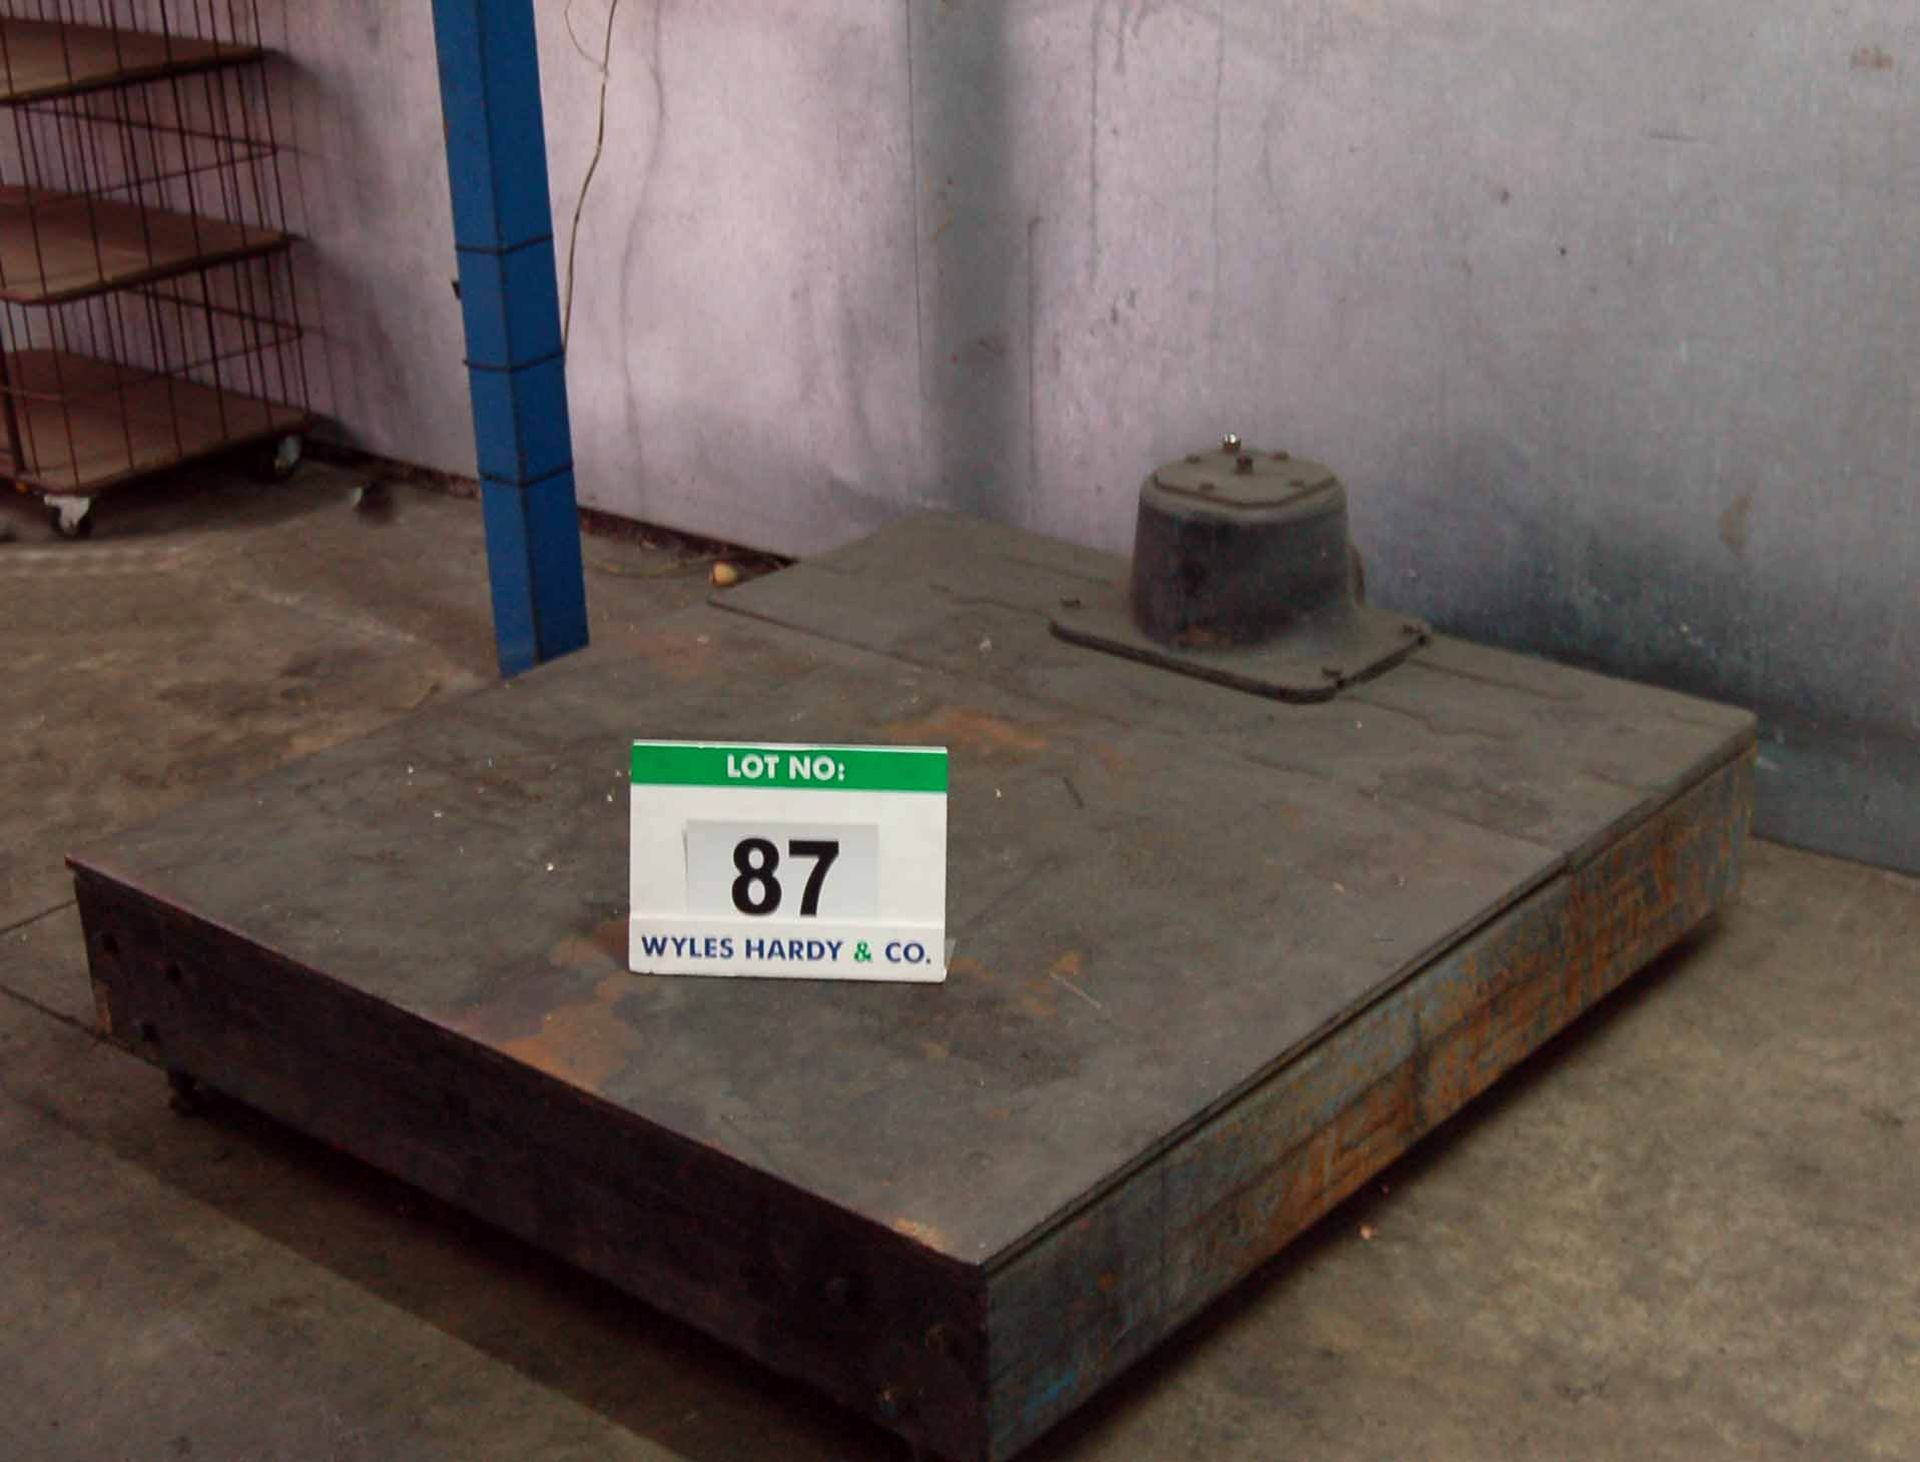 An Approx. 1.4M x 1.25M Steel Portable Platform Scales with A Wall mounted SYTEM 1X 1500Kg x 0.5Kg